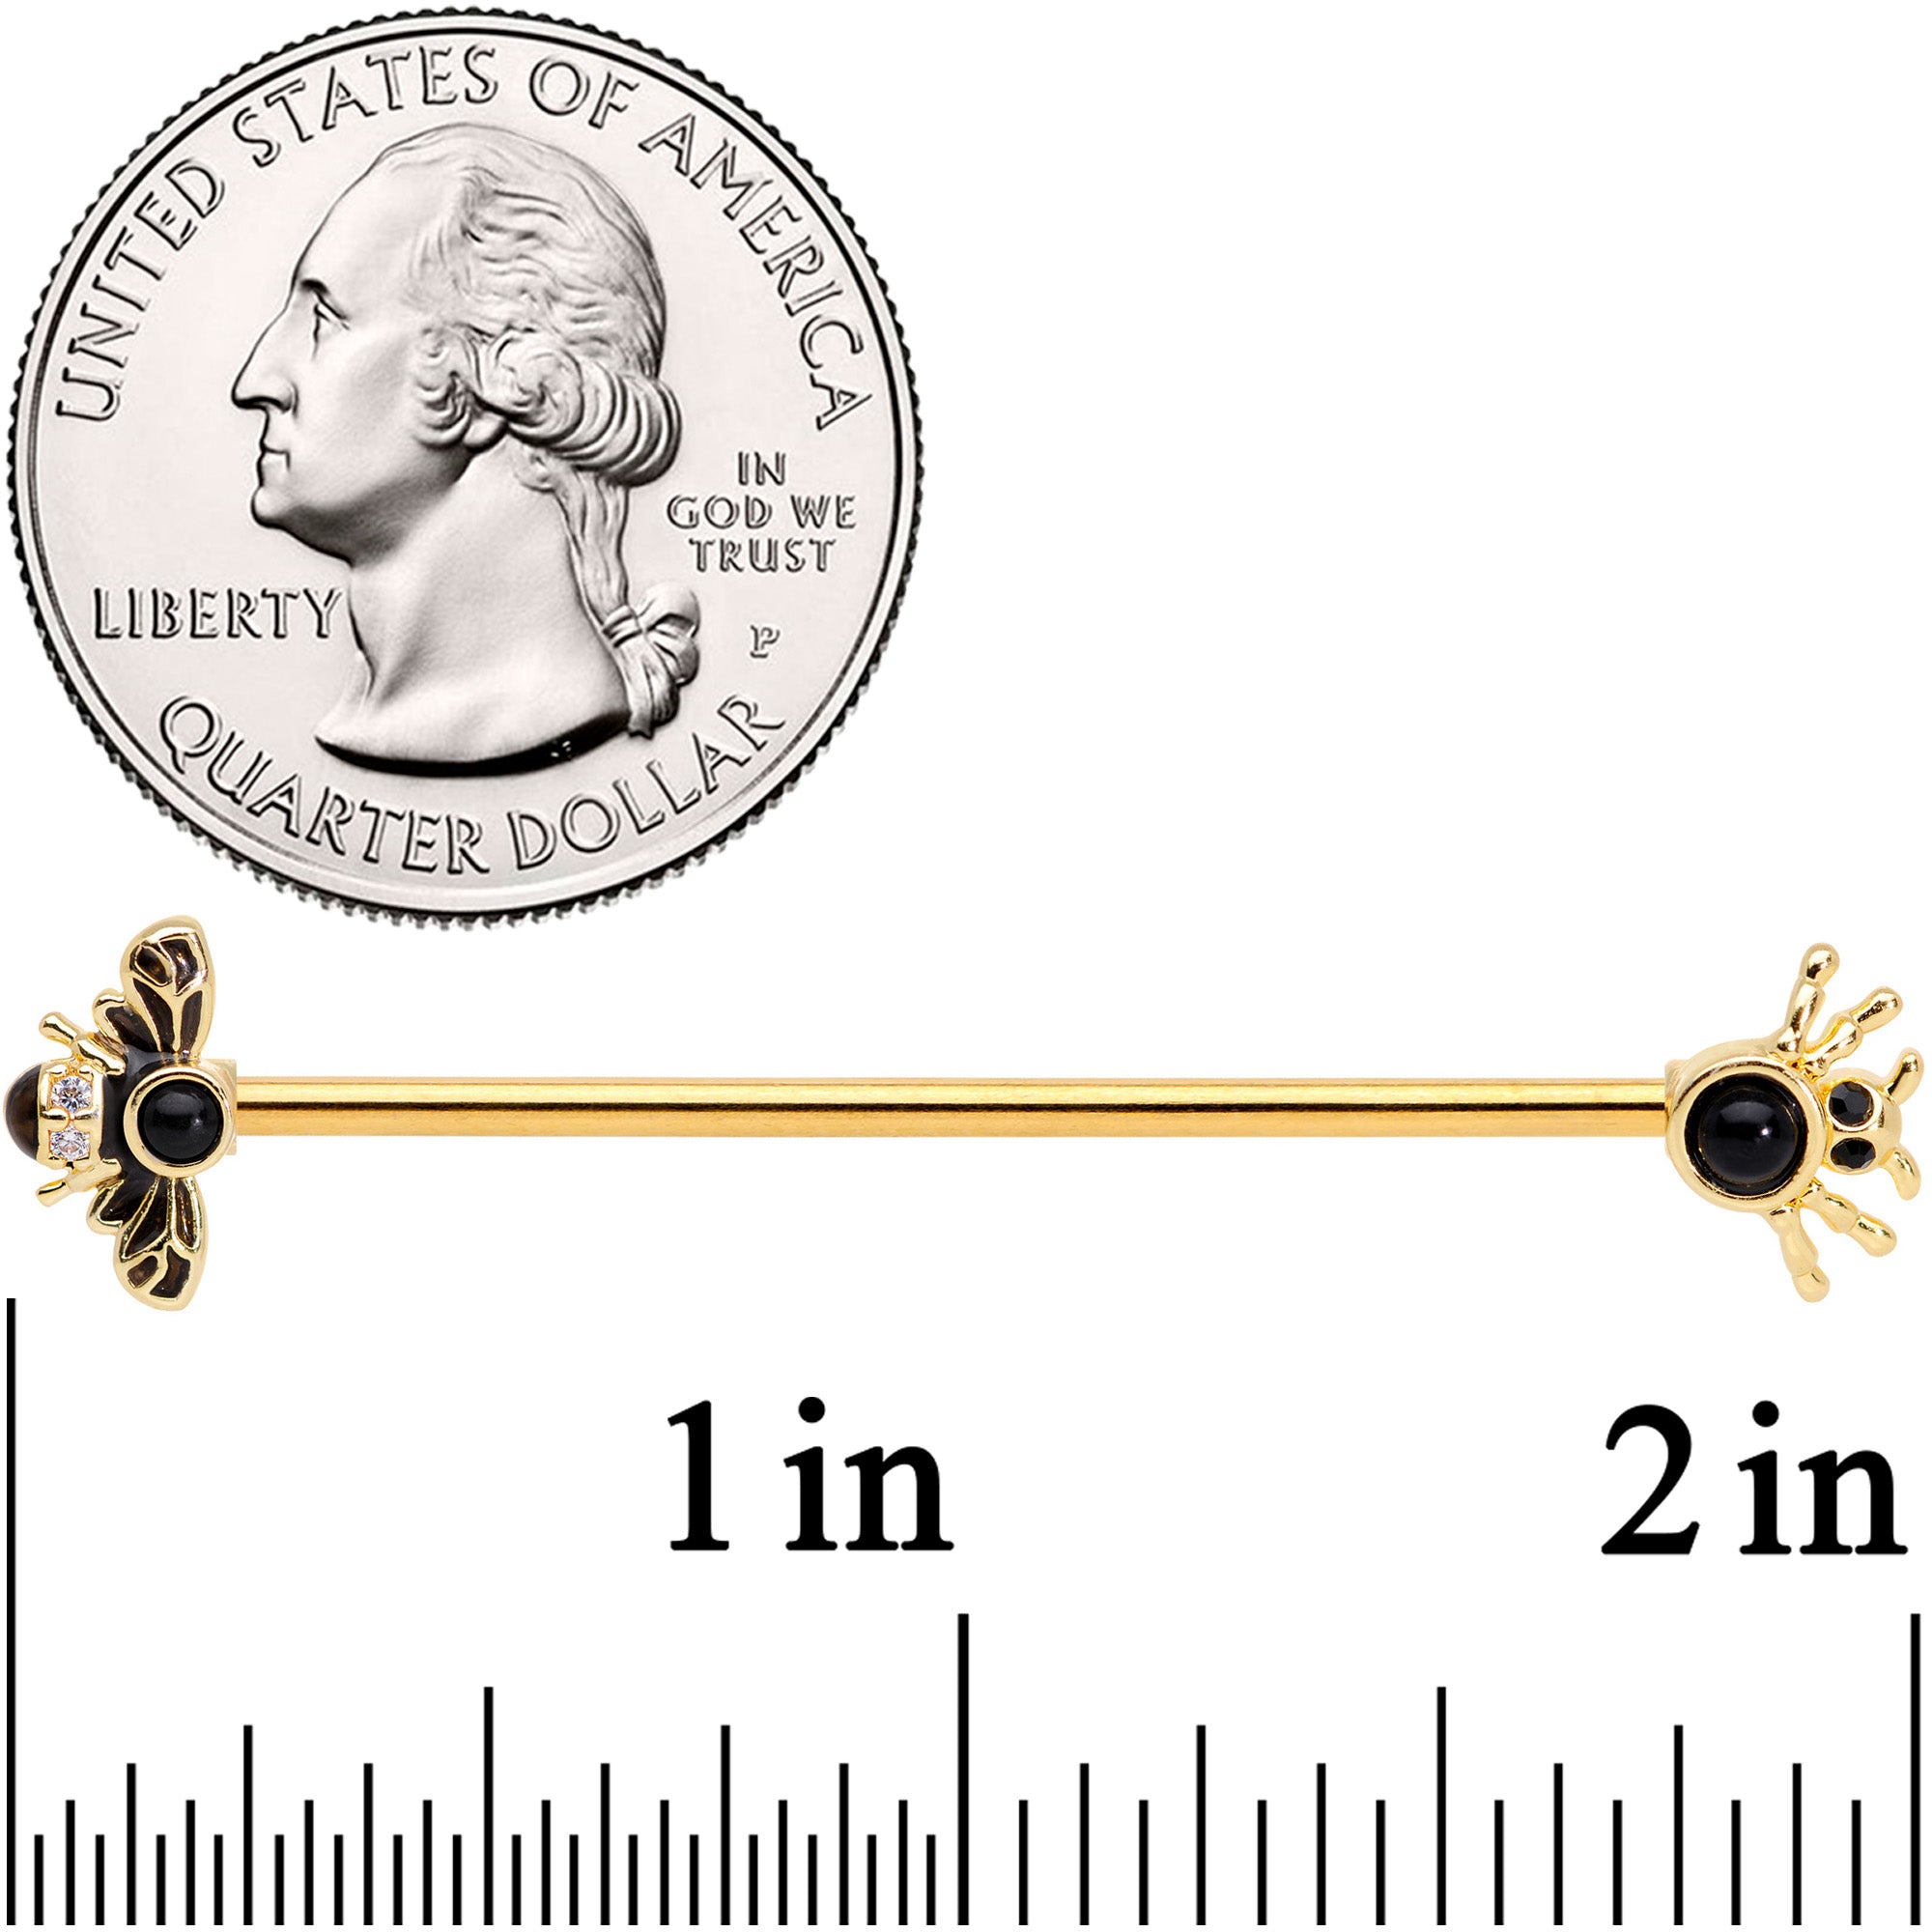 14 Gauge Clear Black Gem Gold Tone Bug Out Bee Insect Industrial Barbell 38mm